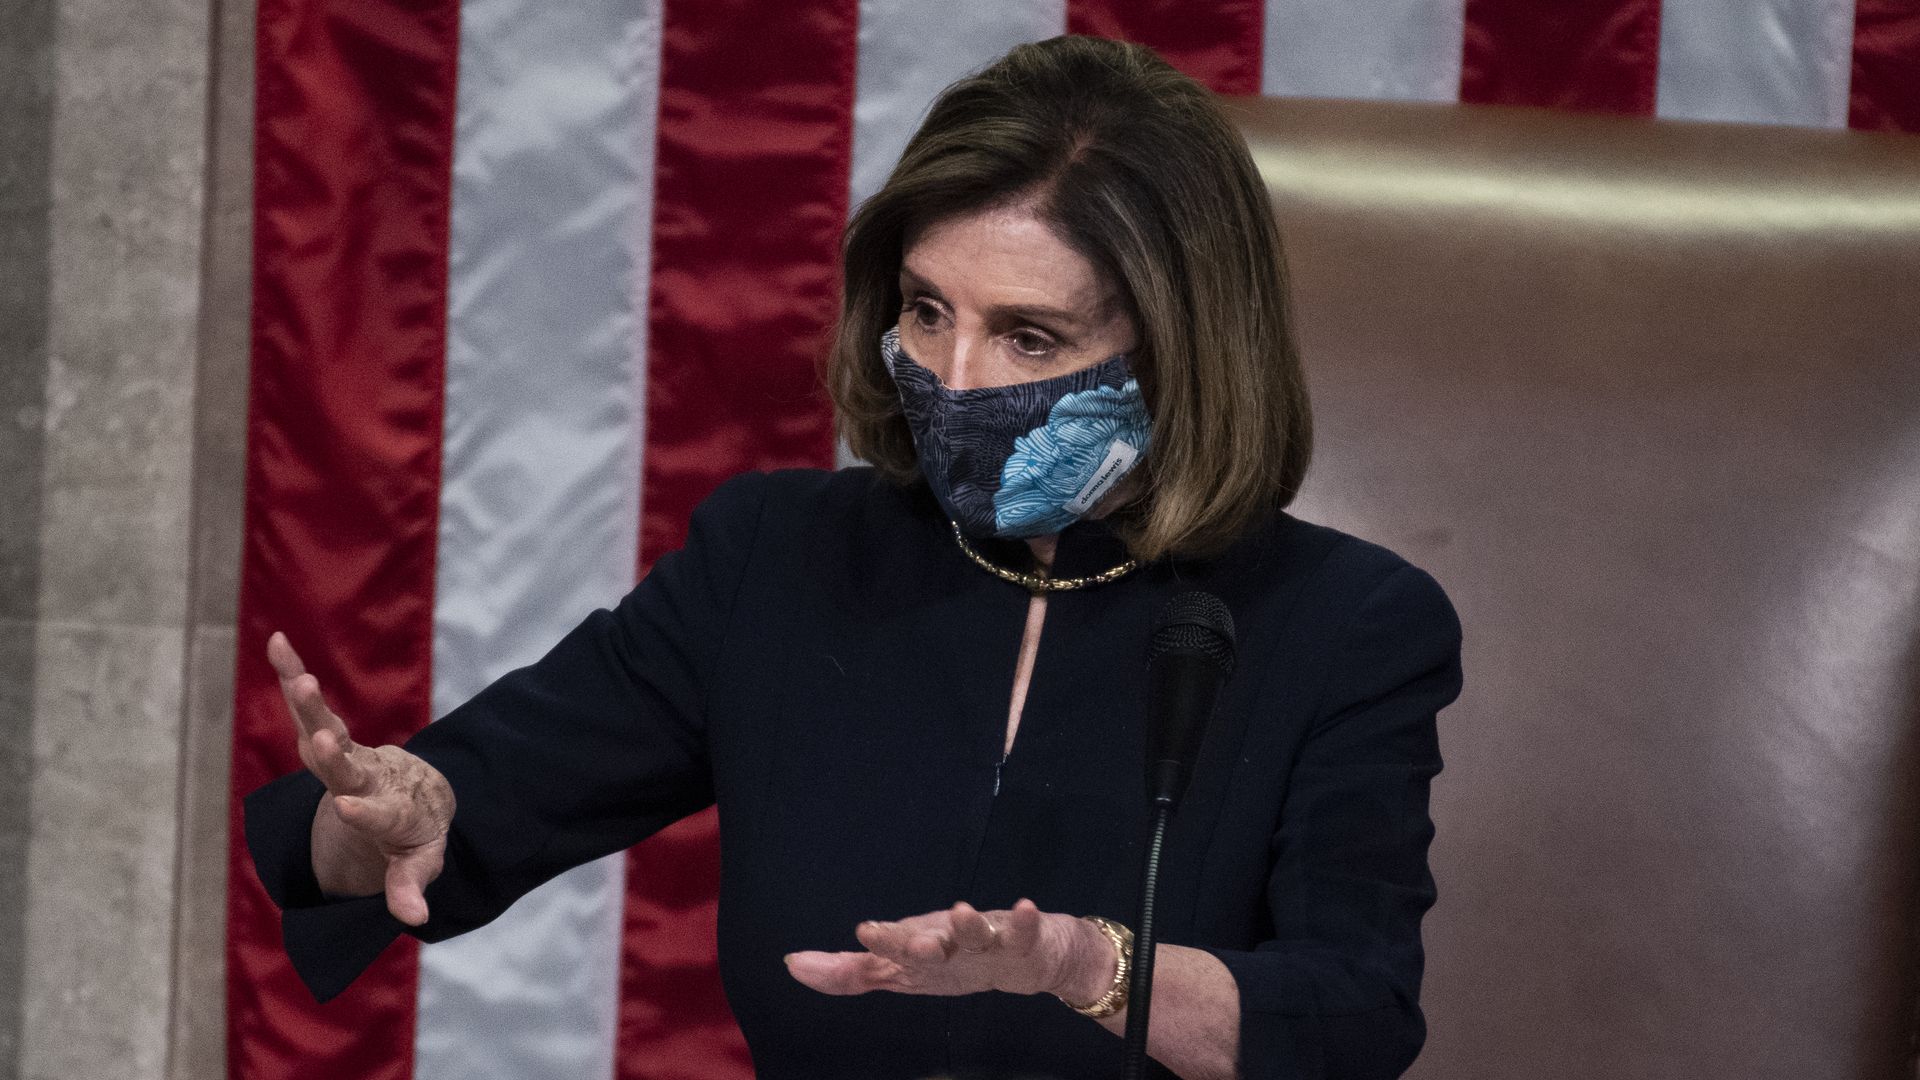 Speaker of the House Nancy Pelosi, D-Calif., prepares to gavel the House into recess after the chamber voted to impeach President Donald Trump for inciting an insurrection on Wednesday, January 13